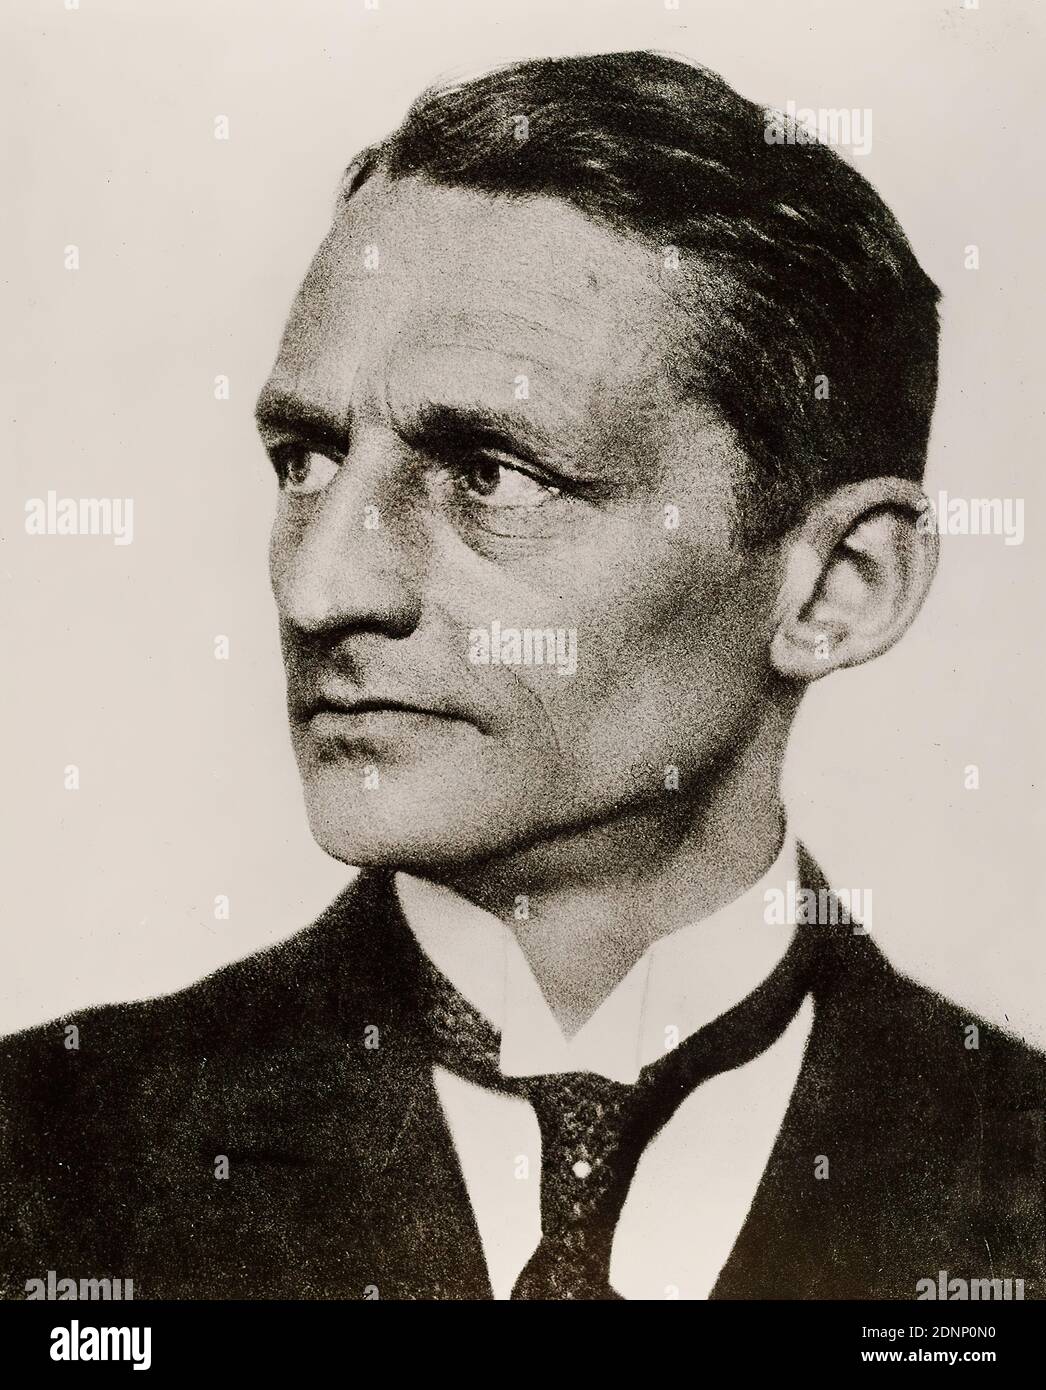 Hugo Erfurth, Max Sauerlandt, silver gelatin paper, black and white positive process, image size: height: 29.3 cm; width: 23.7 cm, in lead: repro; 559, 14, stamp: verso and in the middle: copyright stamp of the Staatliche Landesbildstelle Hamburg presumably to identify press photos, portrait photography, portrait, man, humanities, At the beginning of the 20th century, Hugo Erfurth was one of the most famous professional photographers in Germany, alongside Rudolph Dührkoop and Nicola Perscheid. After completing an apprenticeship as a photographer, he opened his own studio in Dresden at the age Stock Photo